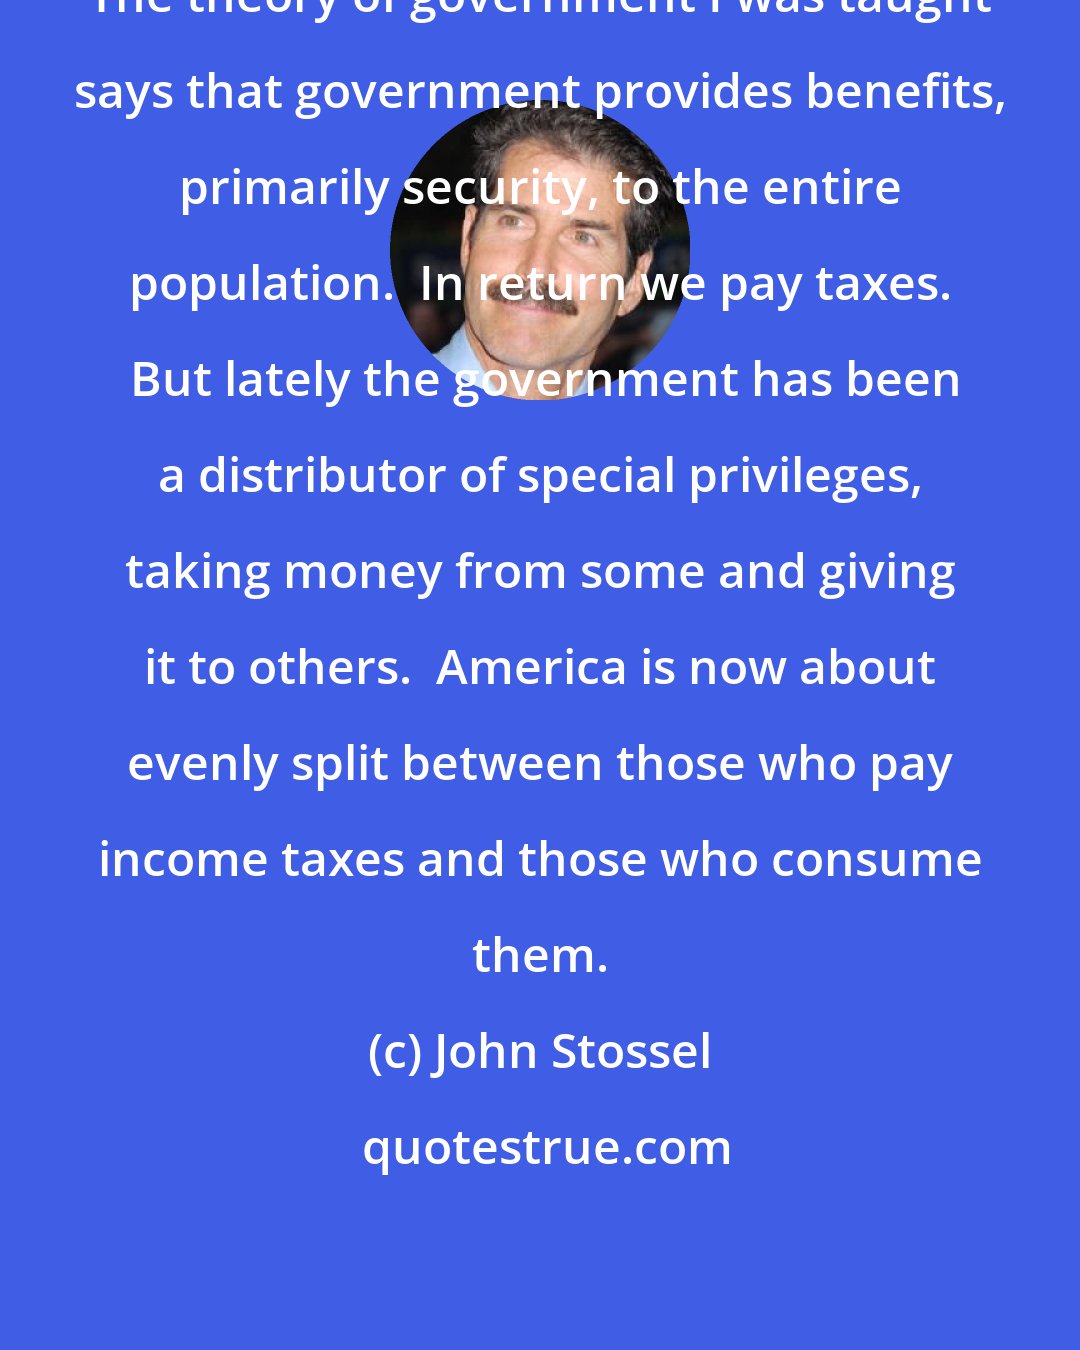 John Stossel: The theory of government I was taught says that government provides benefits, primarily security, to the entire population.  In return we pay taxes.  But lately the government has been a distributor of special privileges, taking money from some and giving it to others.  America is now about evenly split between those who pay income taxes and those who consume them.